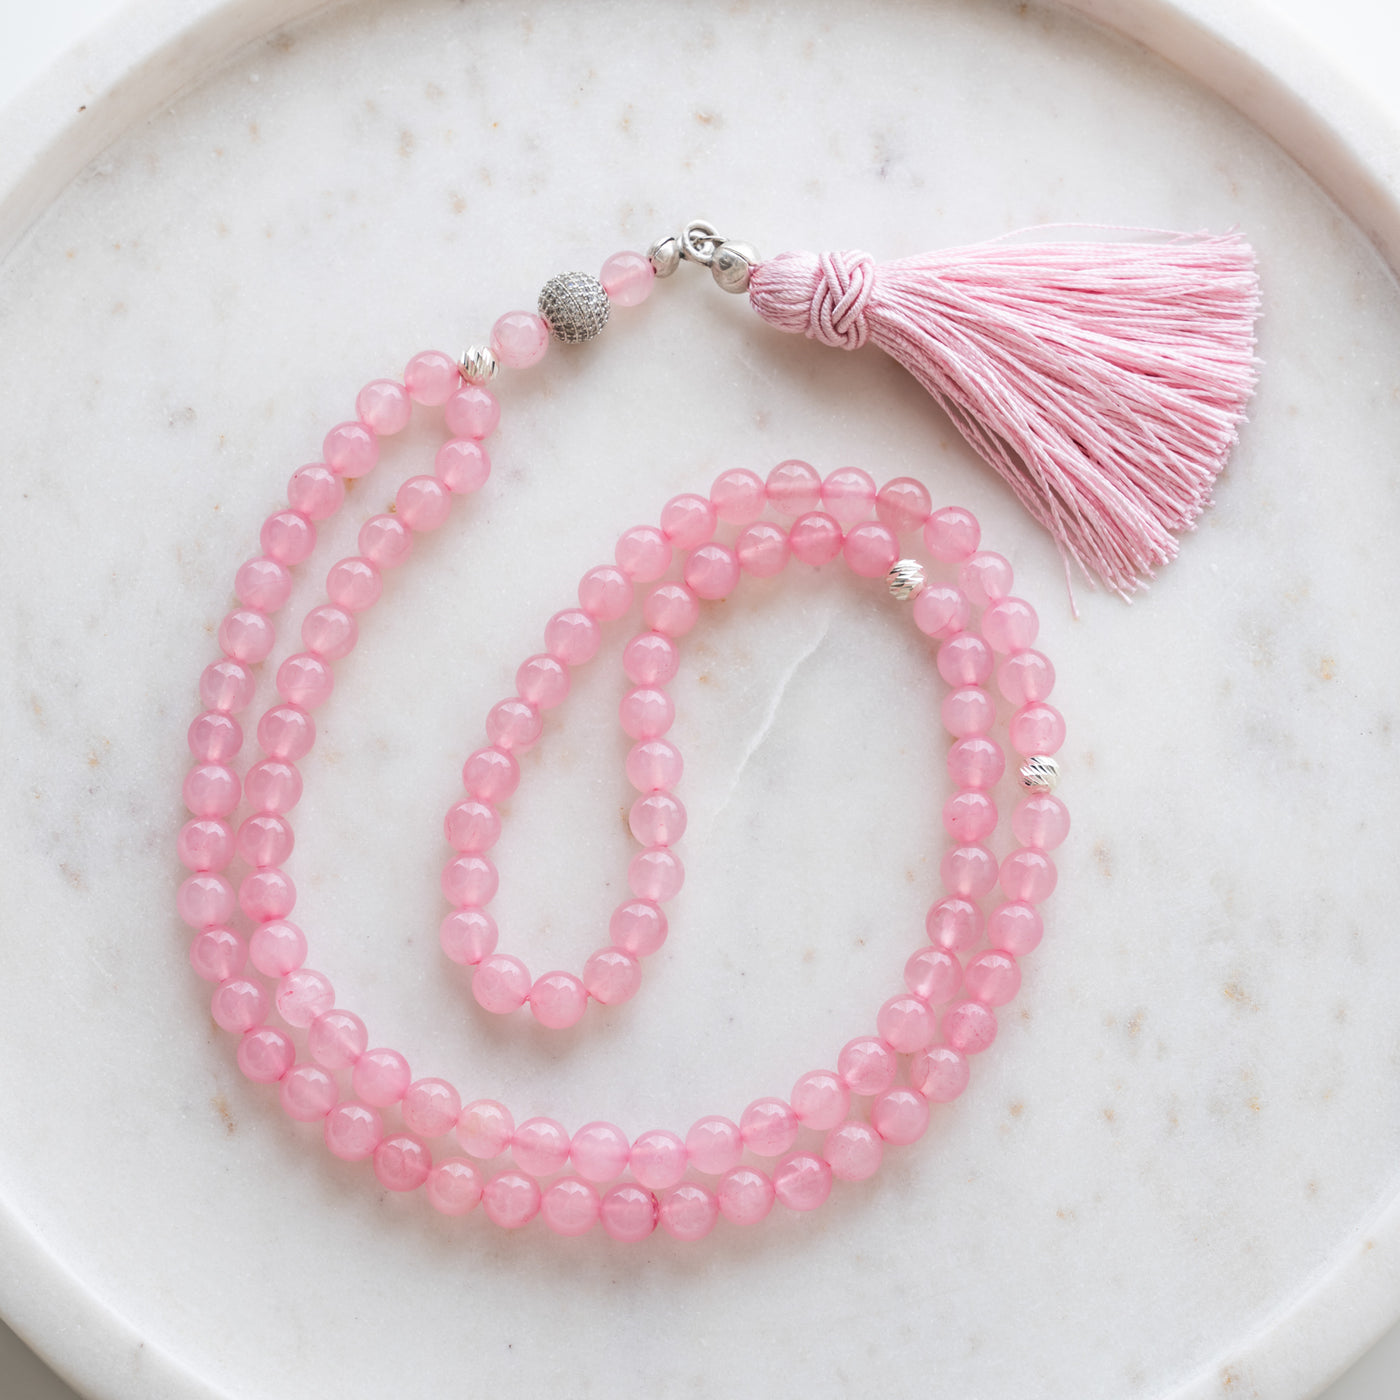 99 Prayer beads - Pink Quartz Gemstone. All Seven Sajada Misbaha are made with cubic zirconia and sterling silver separators. The Tasbih are handmade in Turkey with big attention to details and quality.